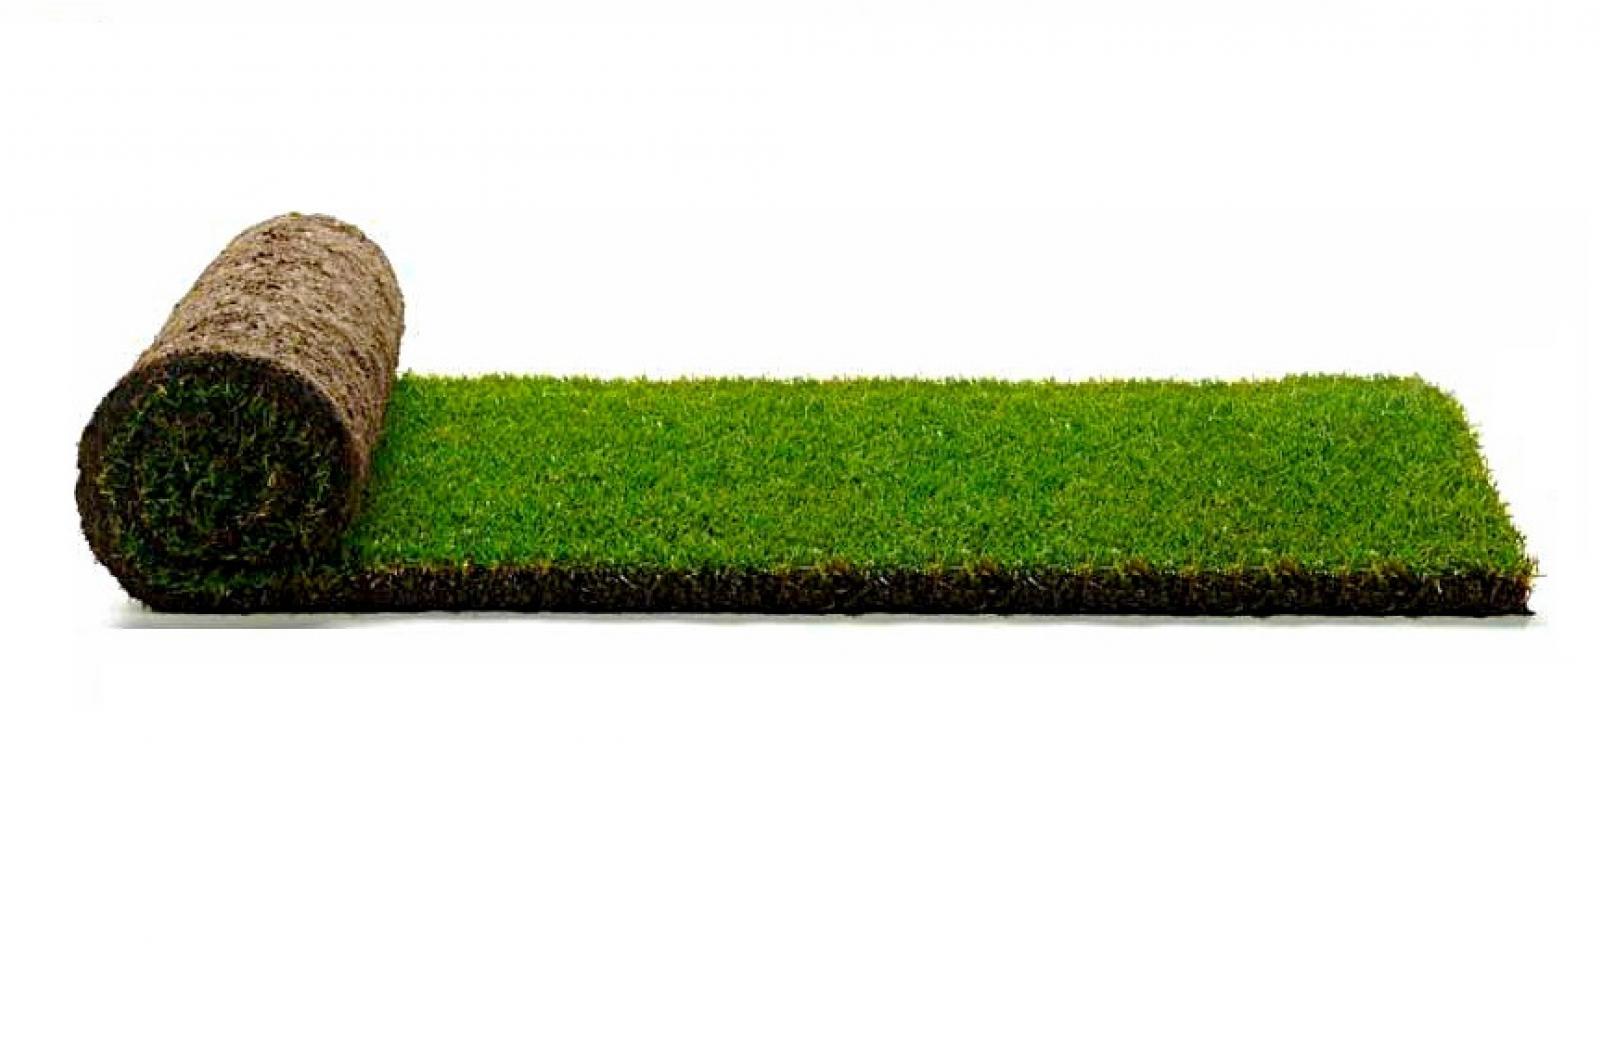 Our English clients : Lawn grass rolls